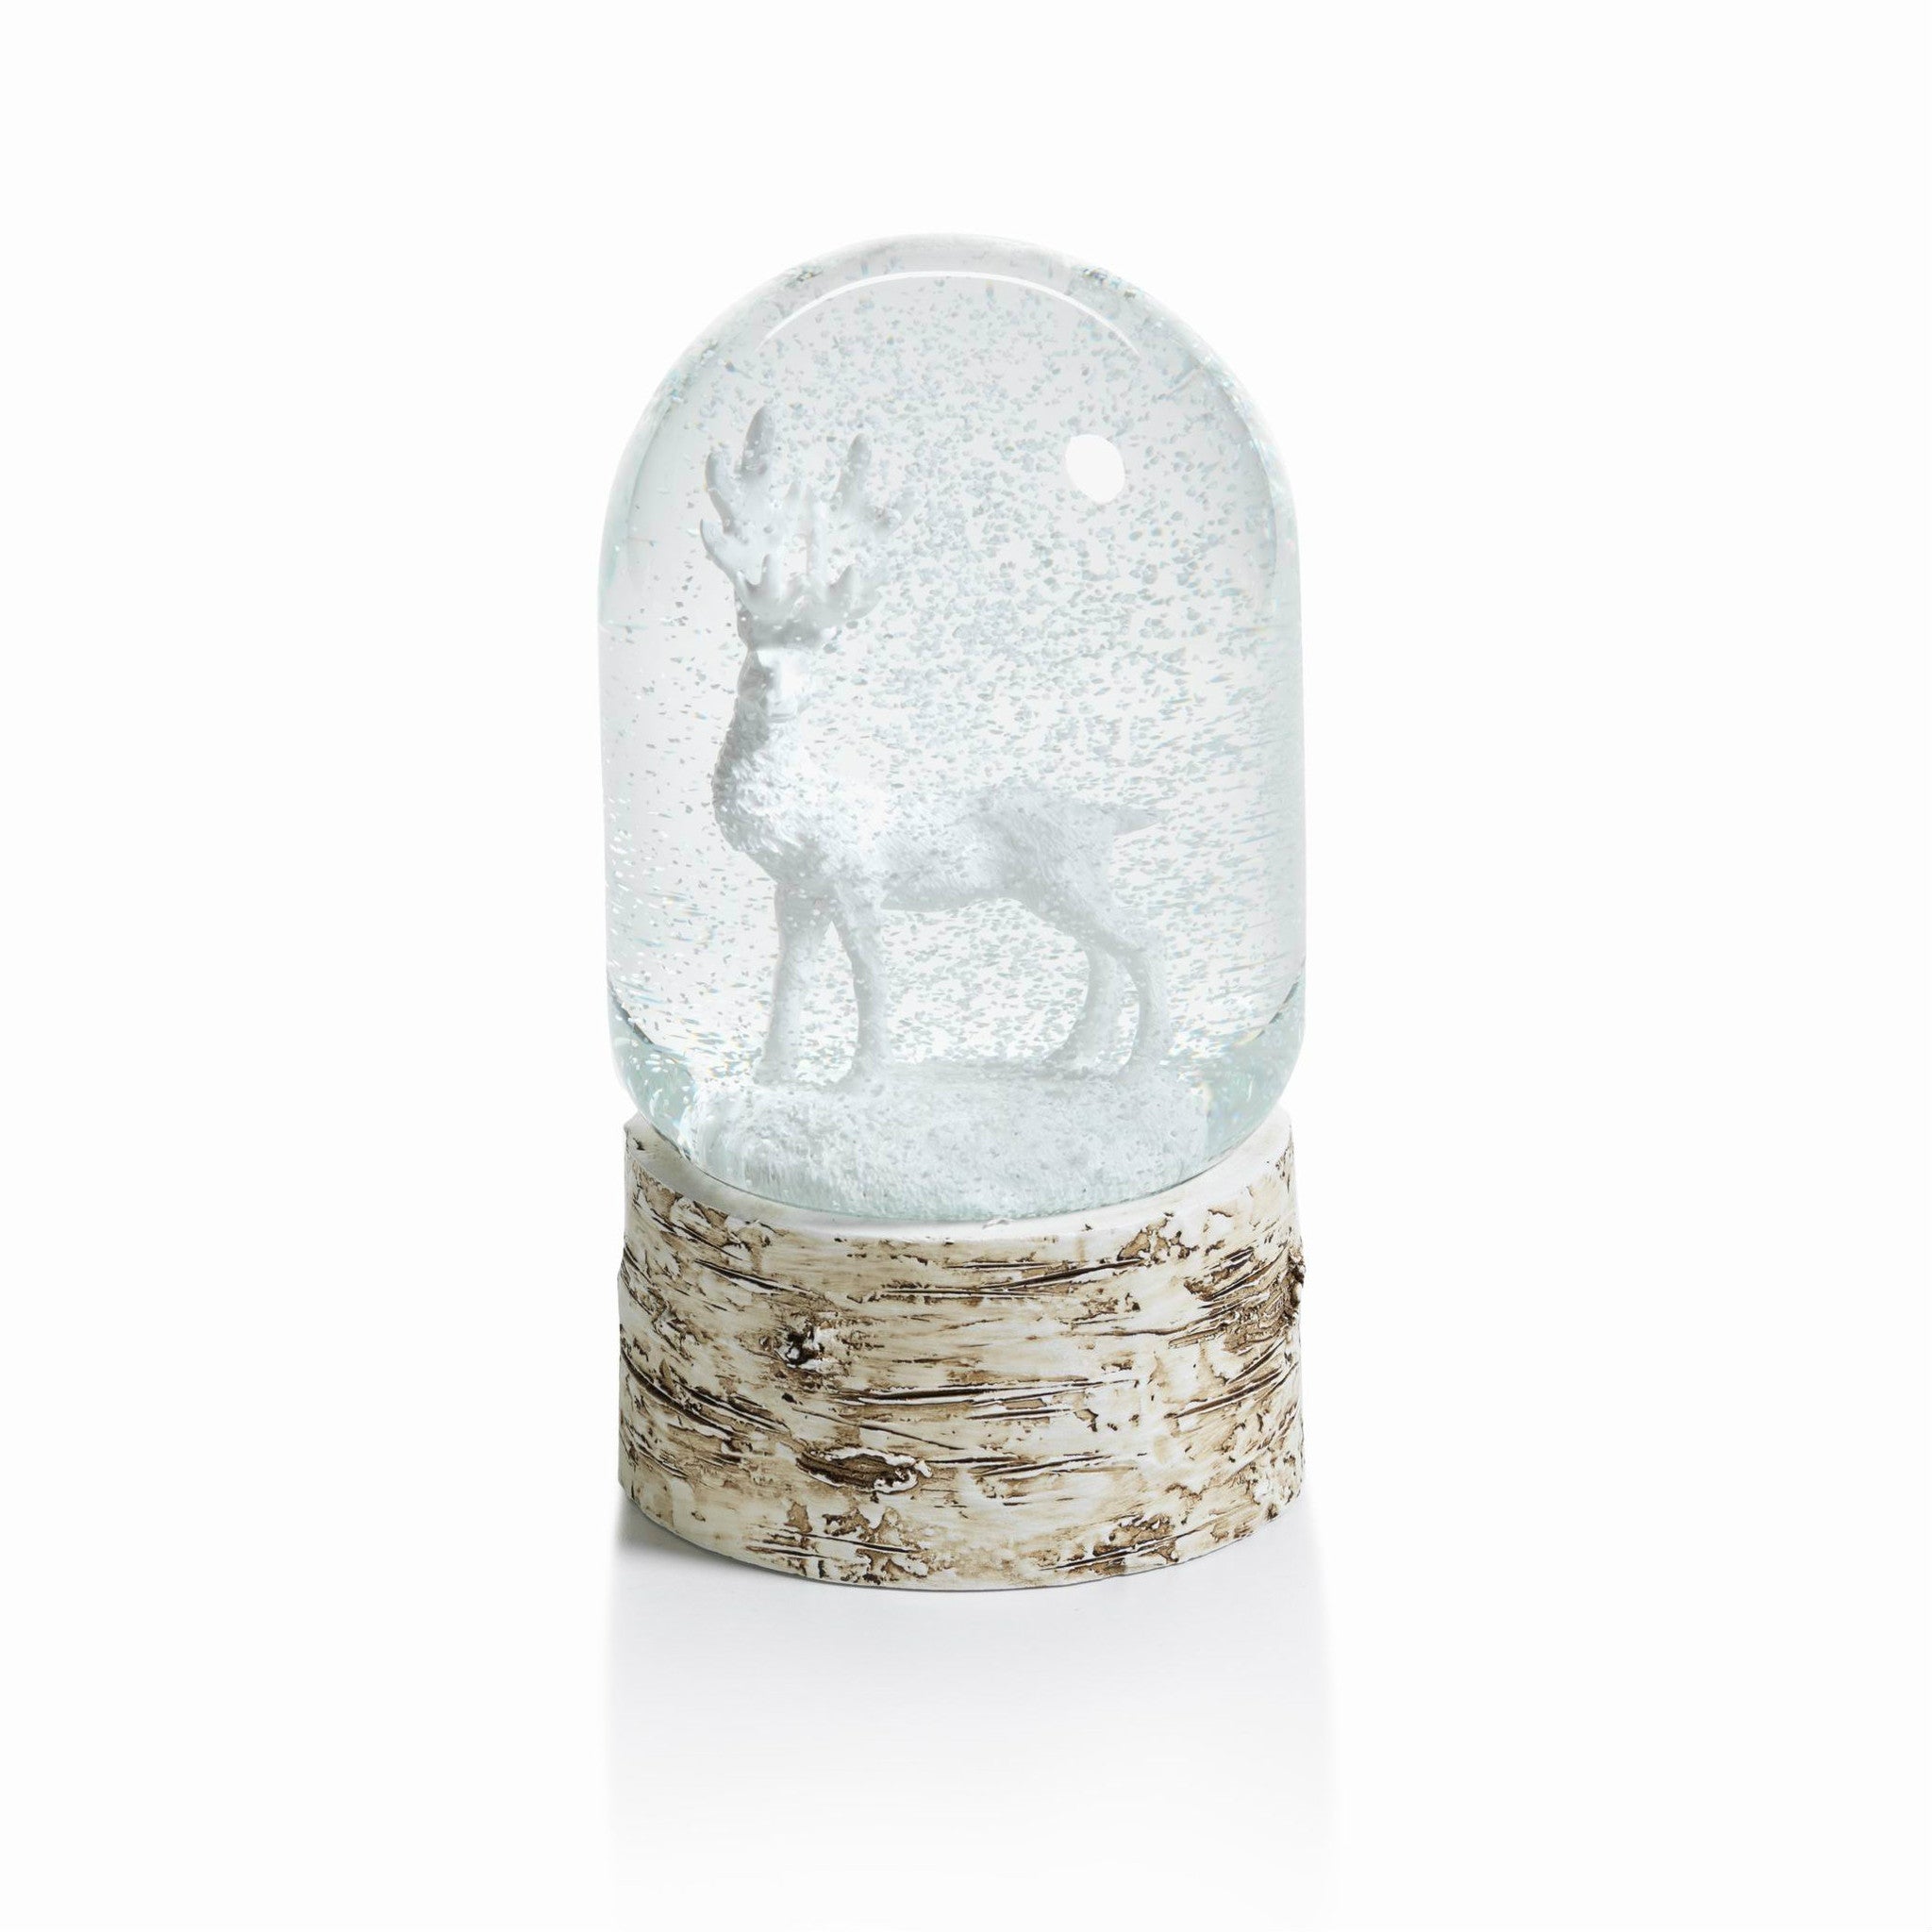 Snow Globe on Birch with White Moose - CARLYLE AVENUE